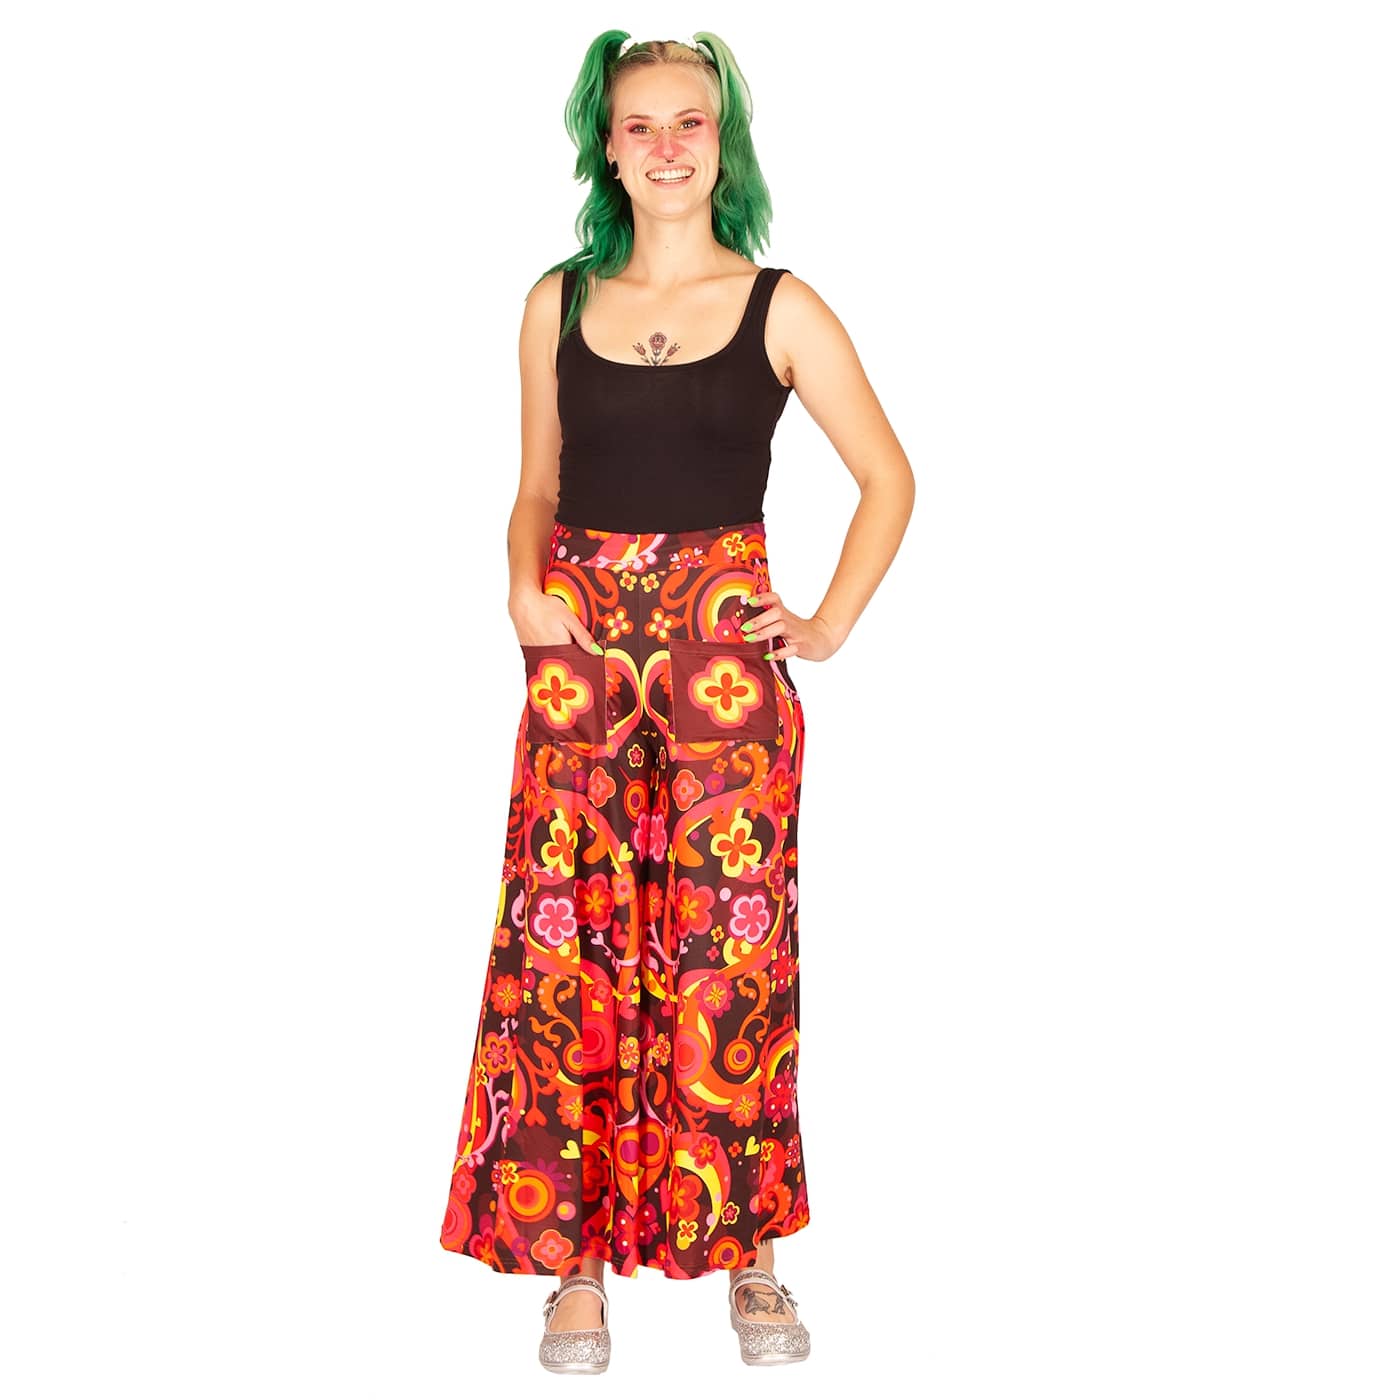 Groovy Days Wide Leg Pants by RainbowsAndFairies.com (Woodstock - Flower Power - Psychedelic - Hippy - Pallazo Pants - Flares Bell Bottoms - Vintage Inspired - Pants With Pockets) - SKU: CL_WIDEL_GROOV_DAY - Pic 02